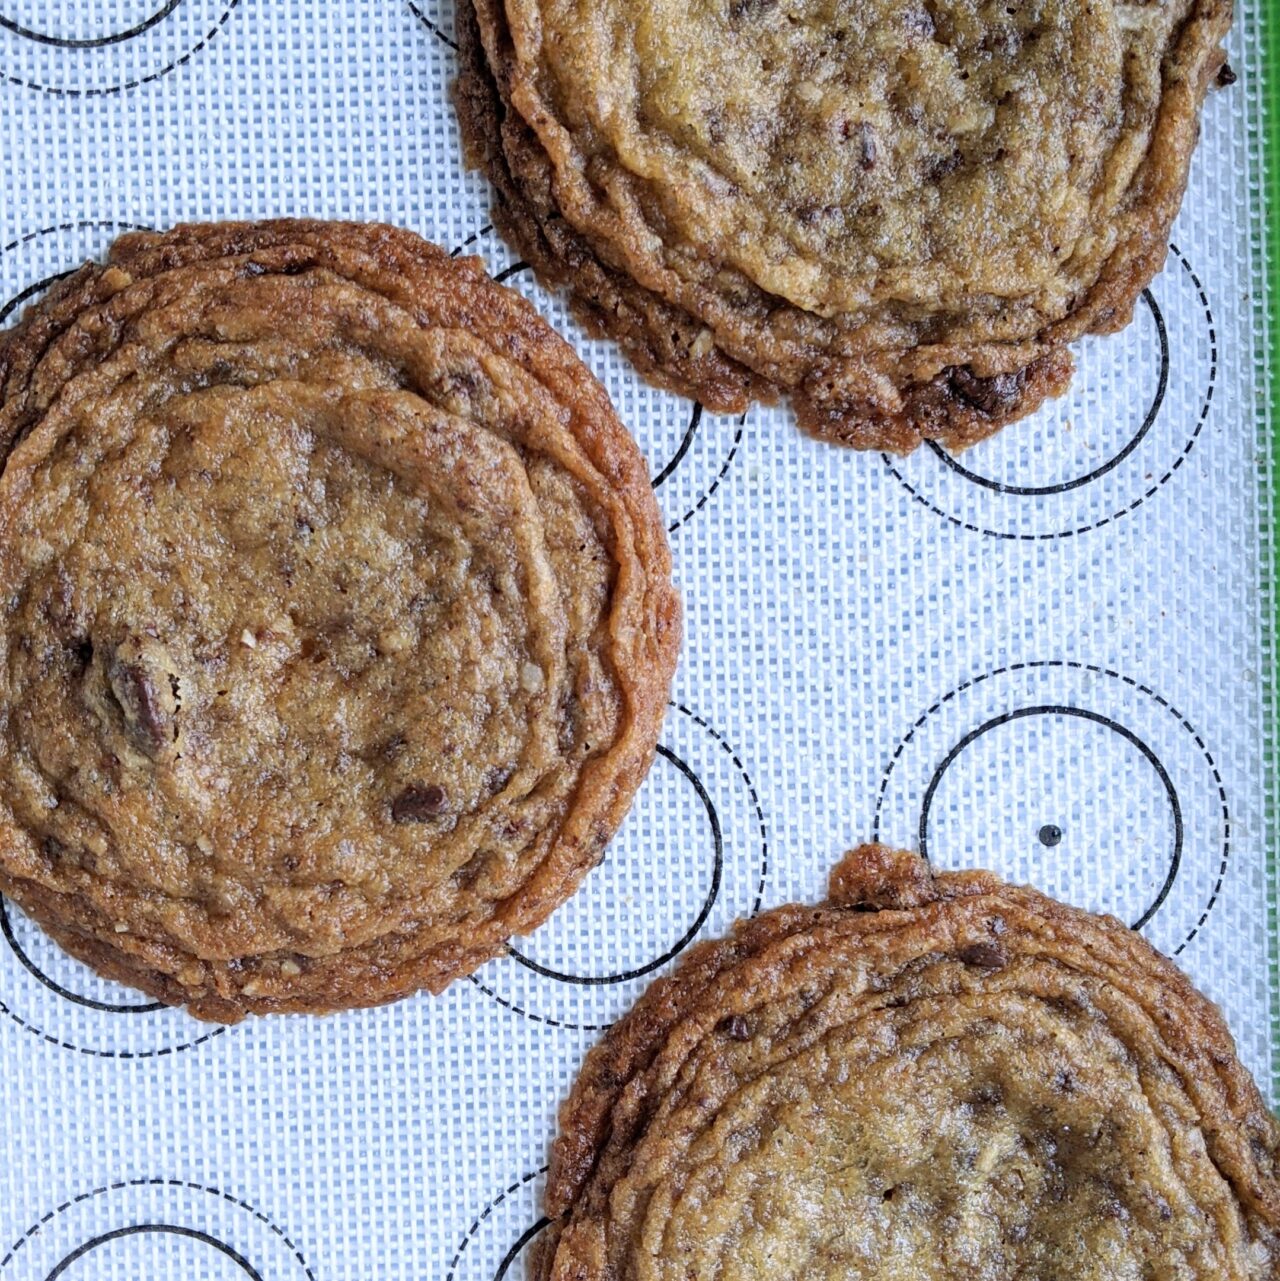 Big crinkly chocolate chip cookies on a baking sheet